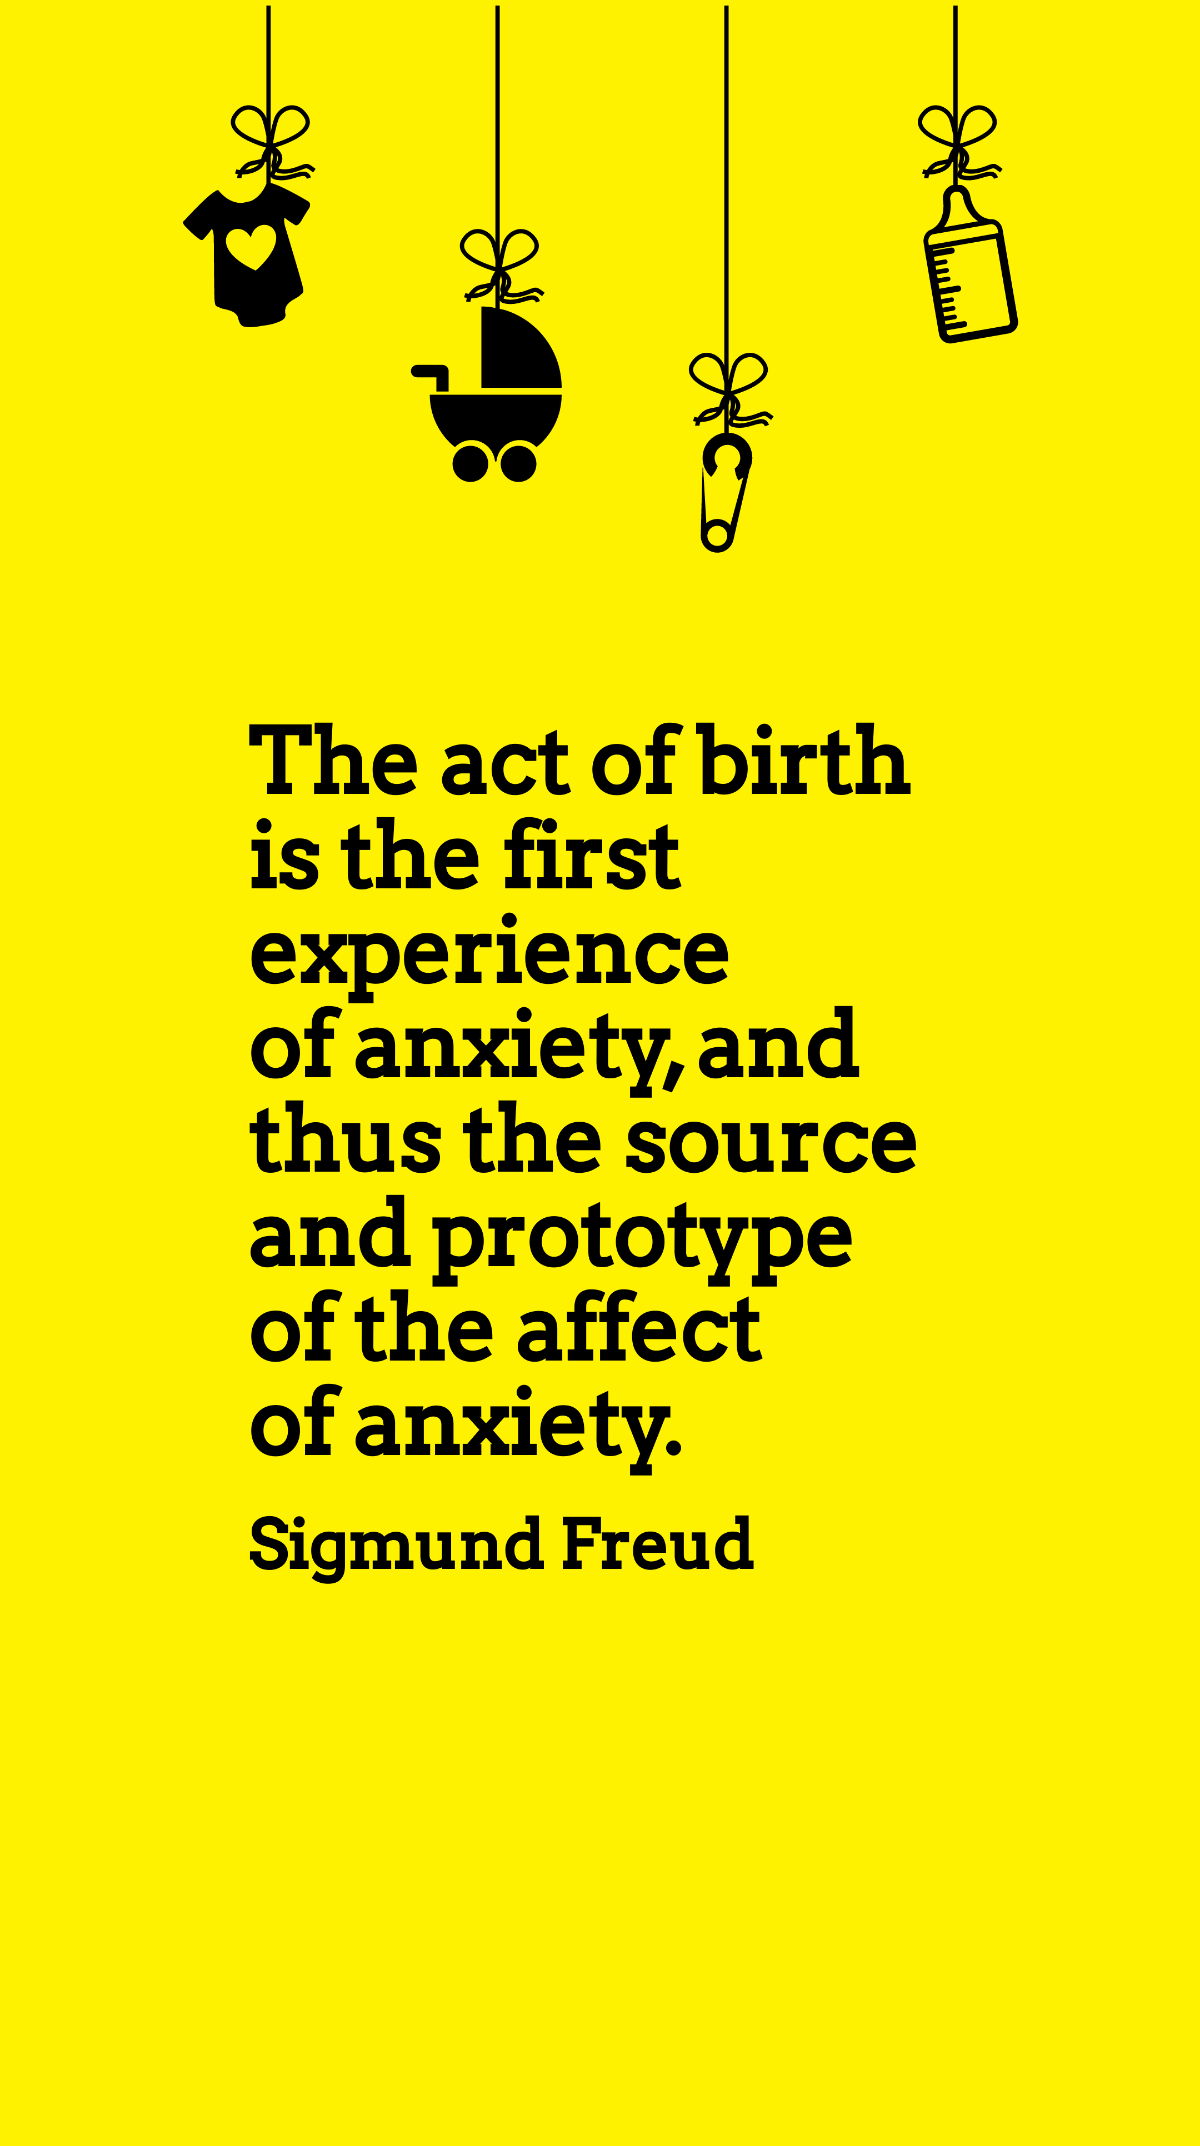 Sigmund Freud - The act of birth is the first experience of anxiety, and thus the source and prototype of the affect of anxiety. Template